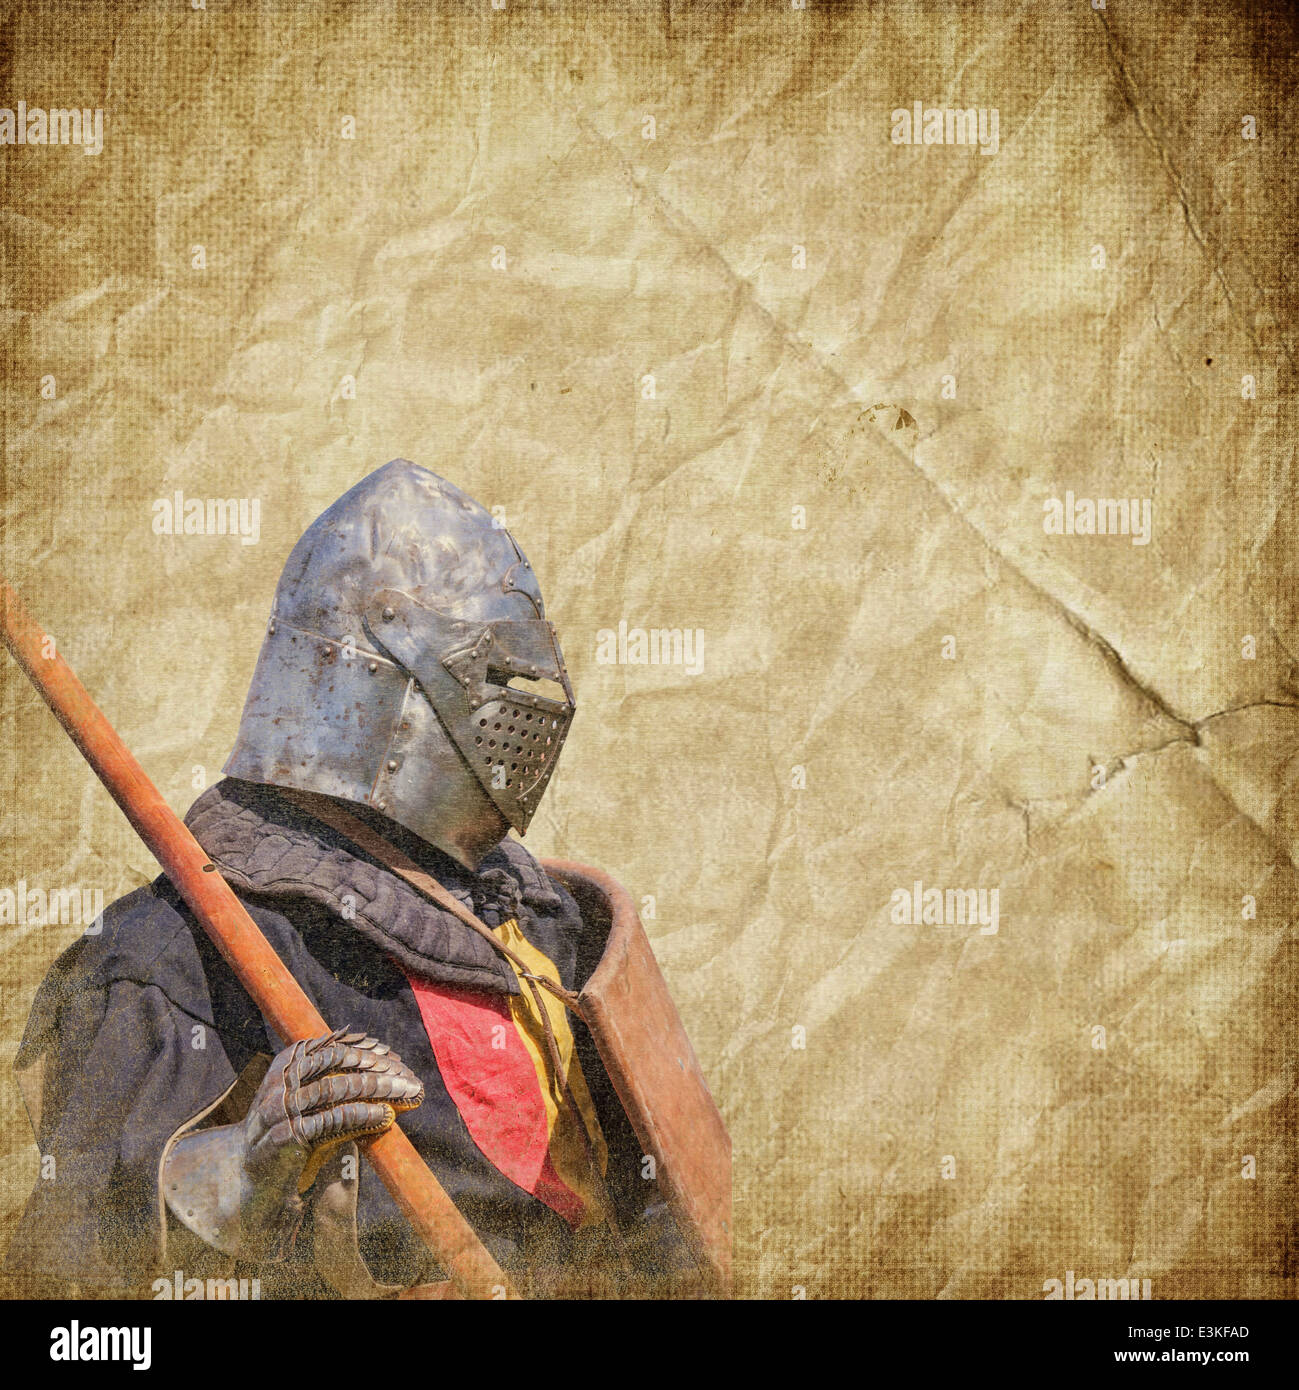 Armored knight - retro postcard on vintage paper background Stock Photo